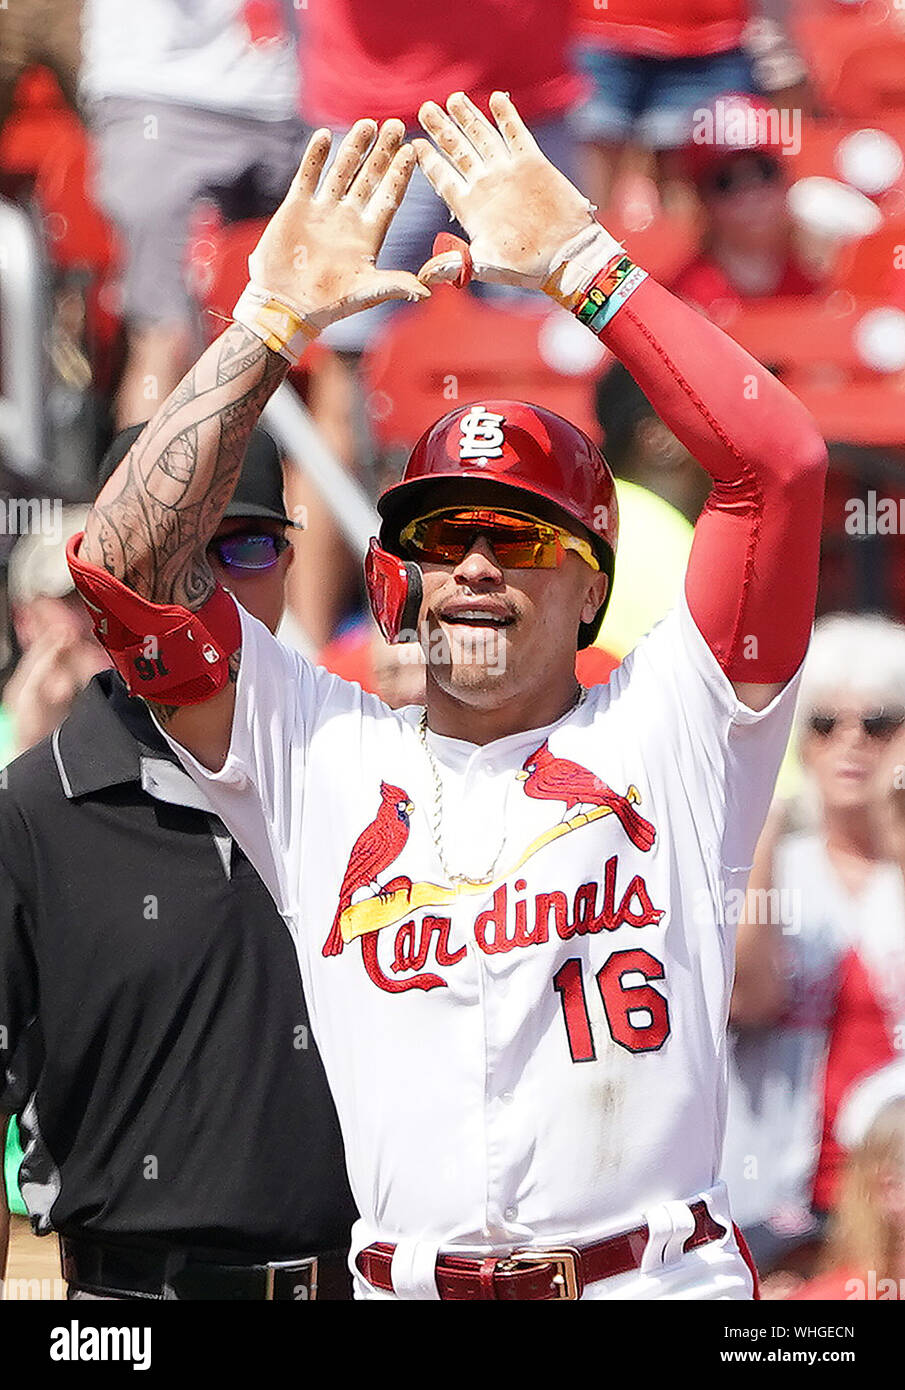 St Louis, USA. 02nd Sep, 2019. St. Louis Cardinals Kolten Wong motions to his dugout after hitting a triple in the first inning against the San Francisco Giants at Busch Stadium in St. Louis on Monday, September 2, 2019. Photo by Bill Greenblatt/UPI Credit: UPI/Alamy Live News Stock Photo